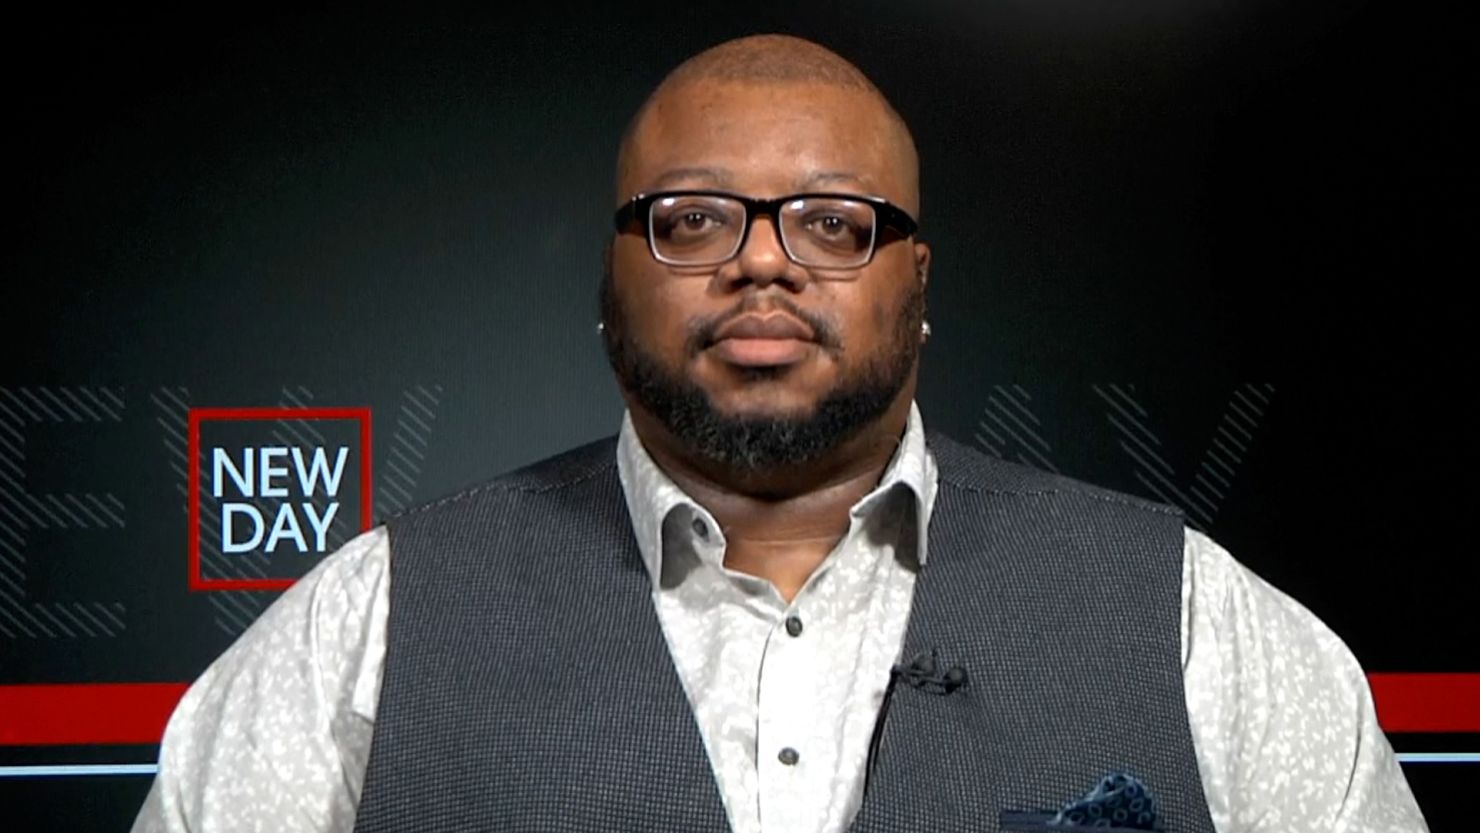 Timothy Moore spoke to CNN's "New Day" on Monday about why he is choosing to get the vaccine.